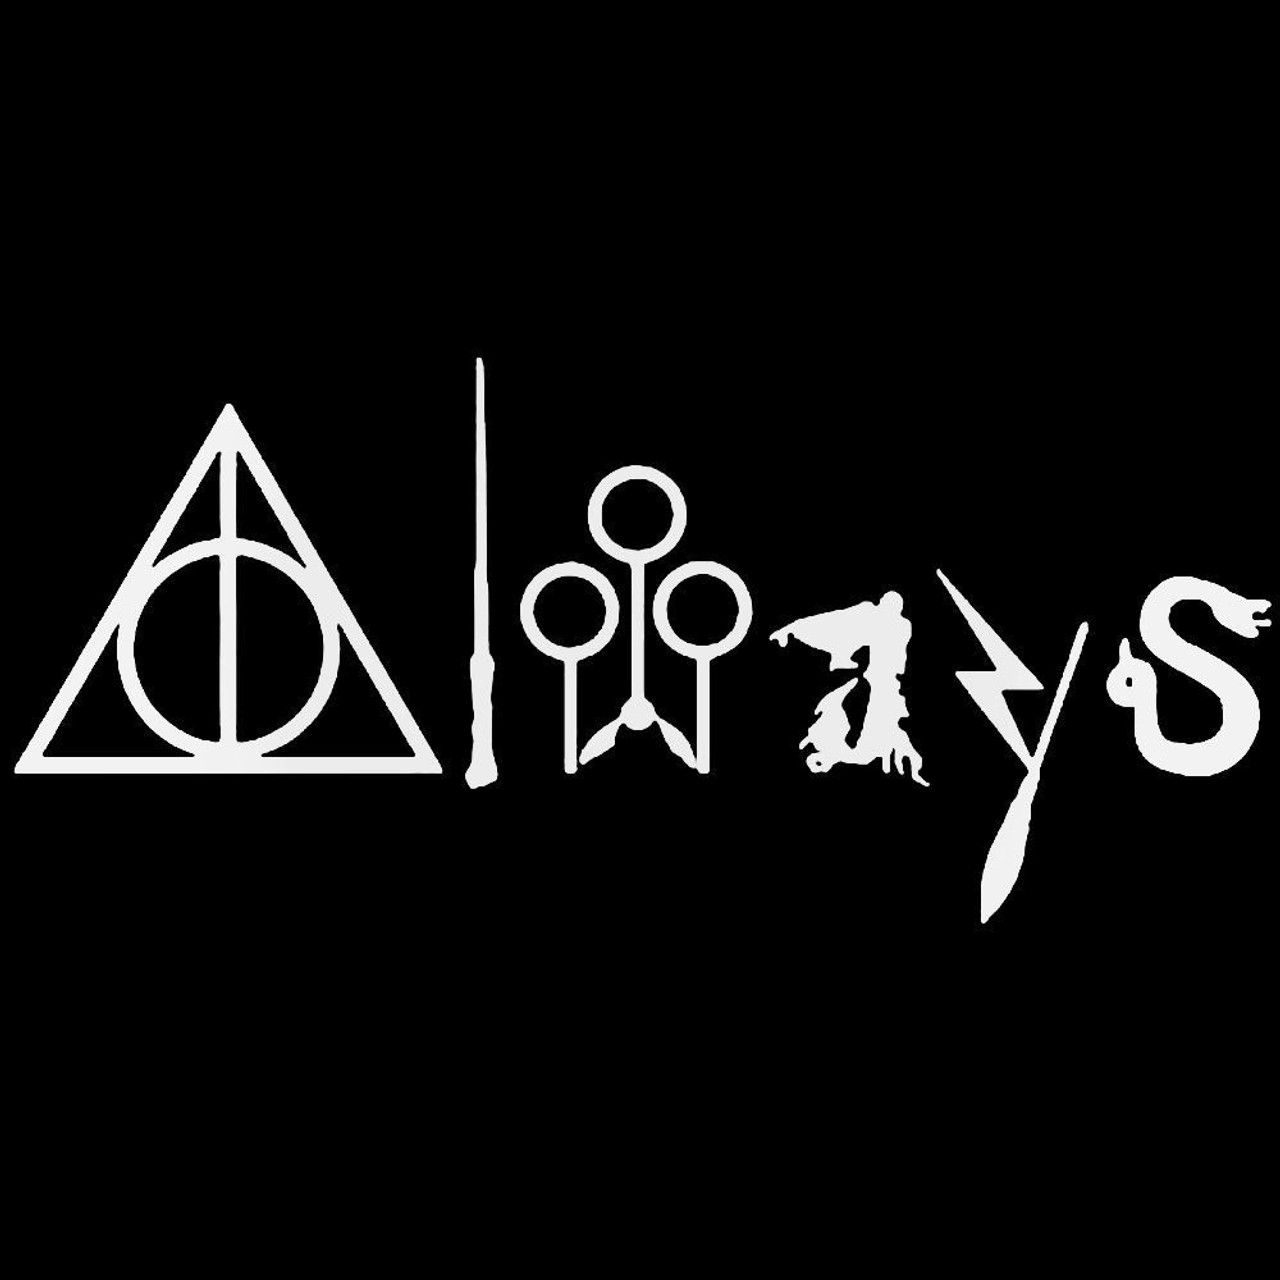 Always Slytherin Harry Potter Graphic Die Cut decal sticker Car Truck Boat 7" 